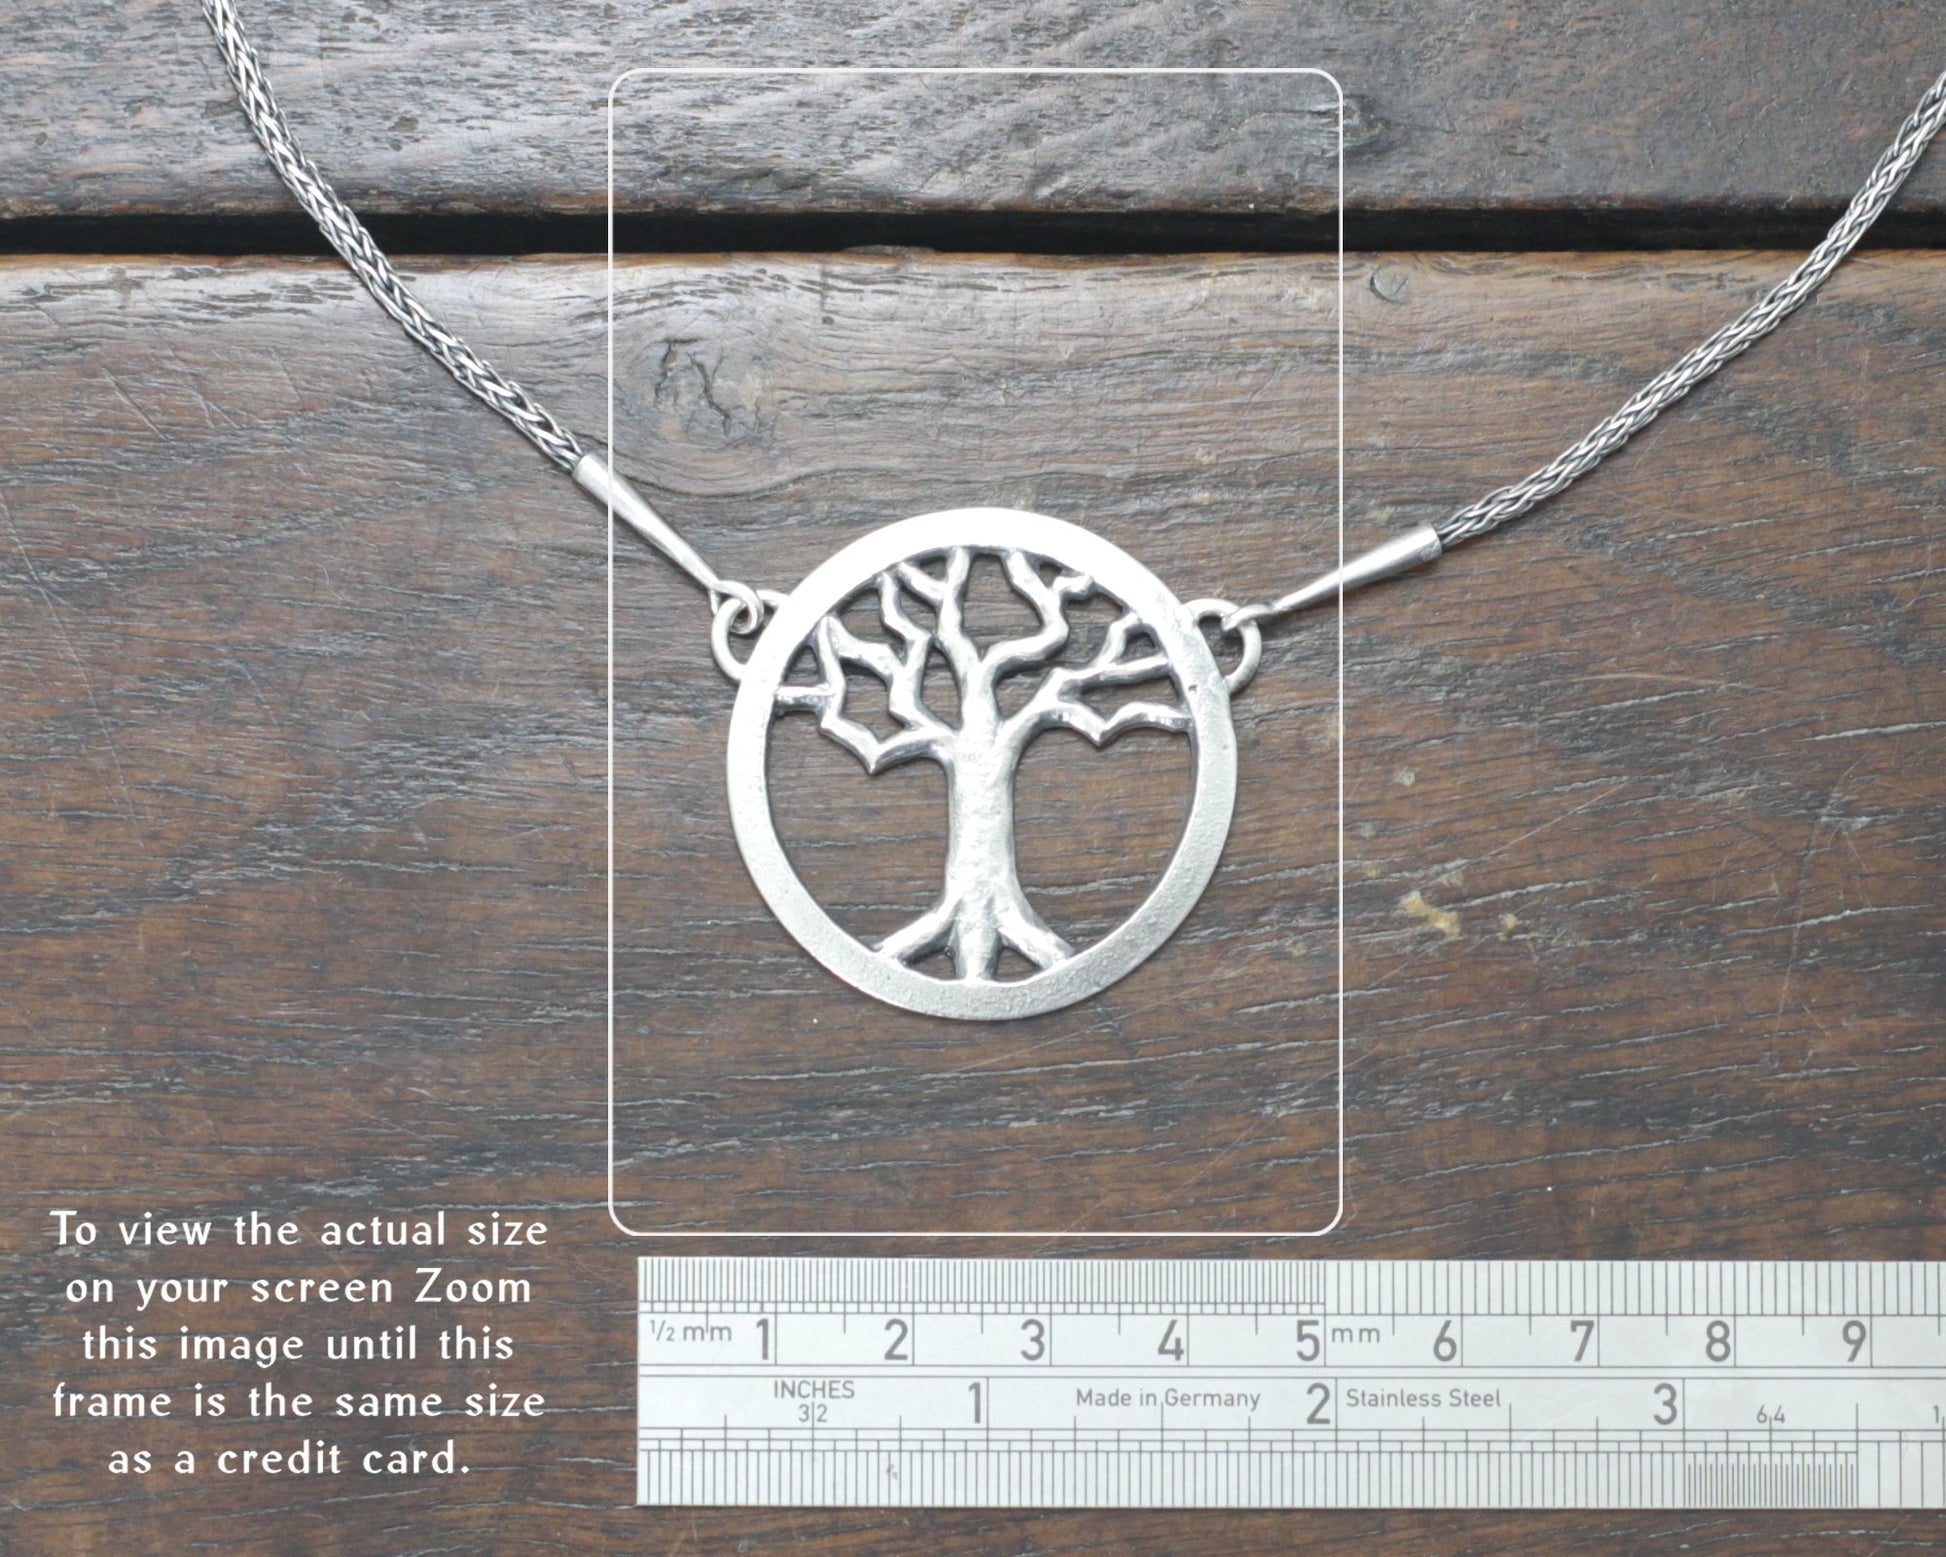 Silver Yggdrasil Tree Necklace by Taitaya Forge, Design by Marleena Barran - Size